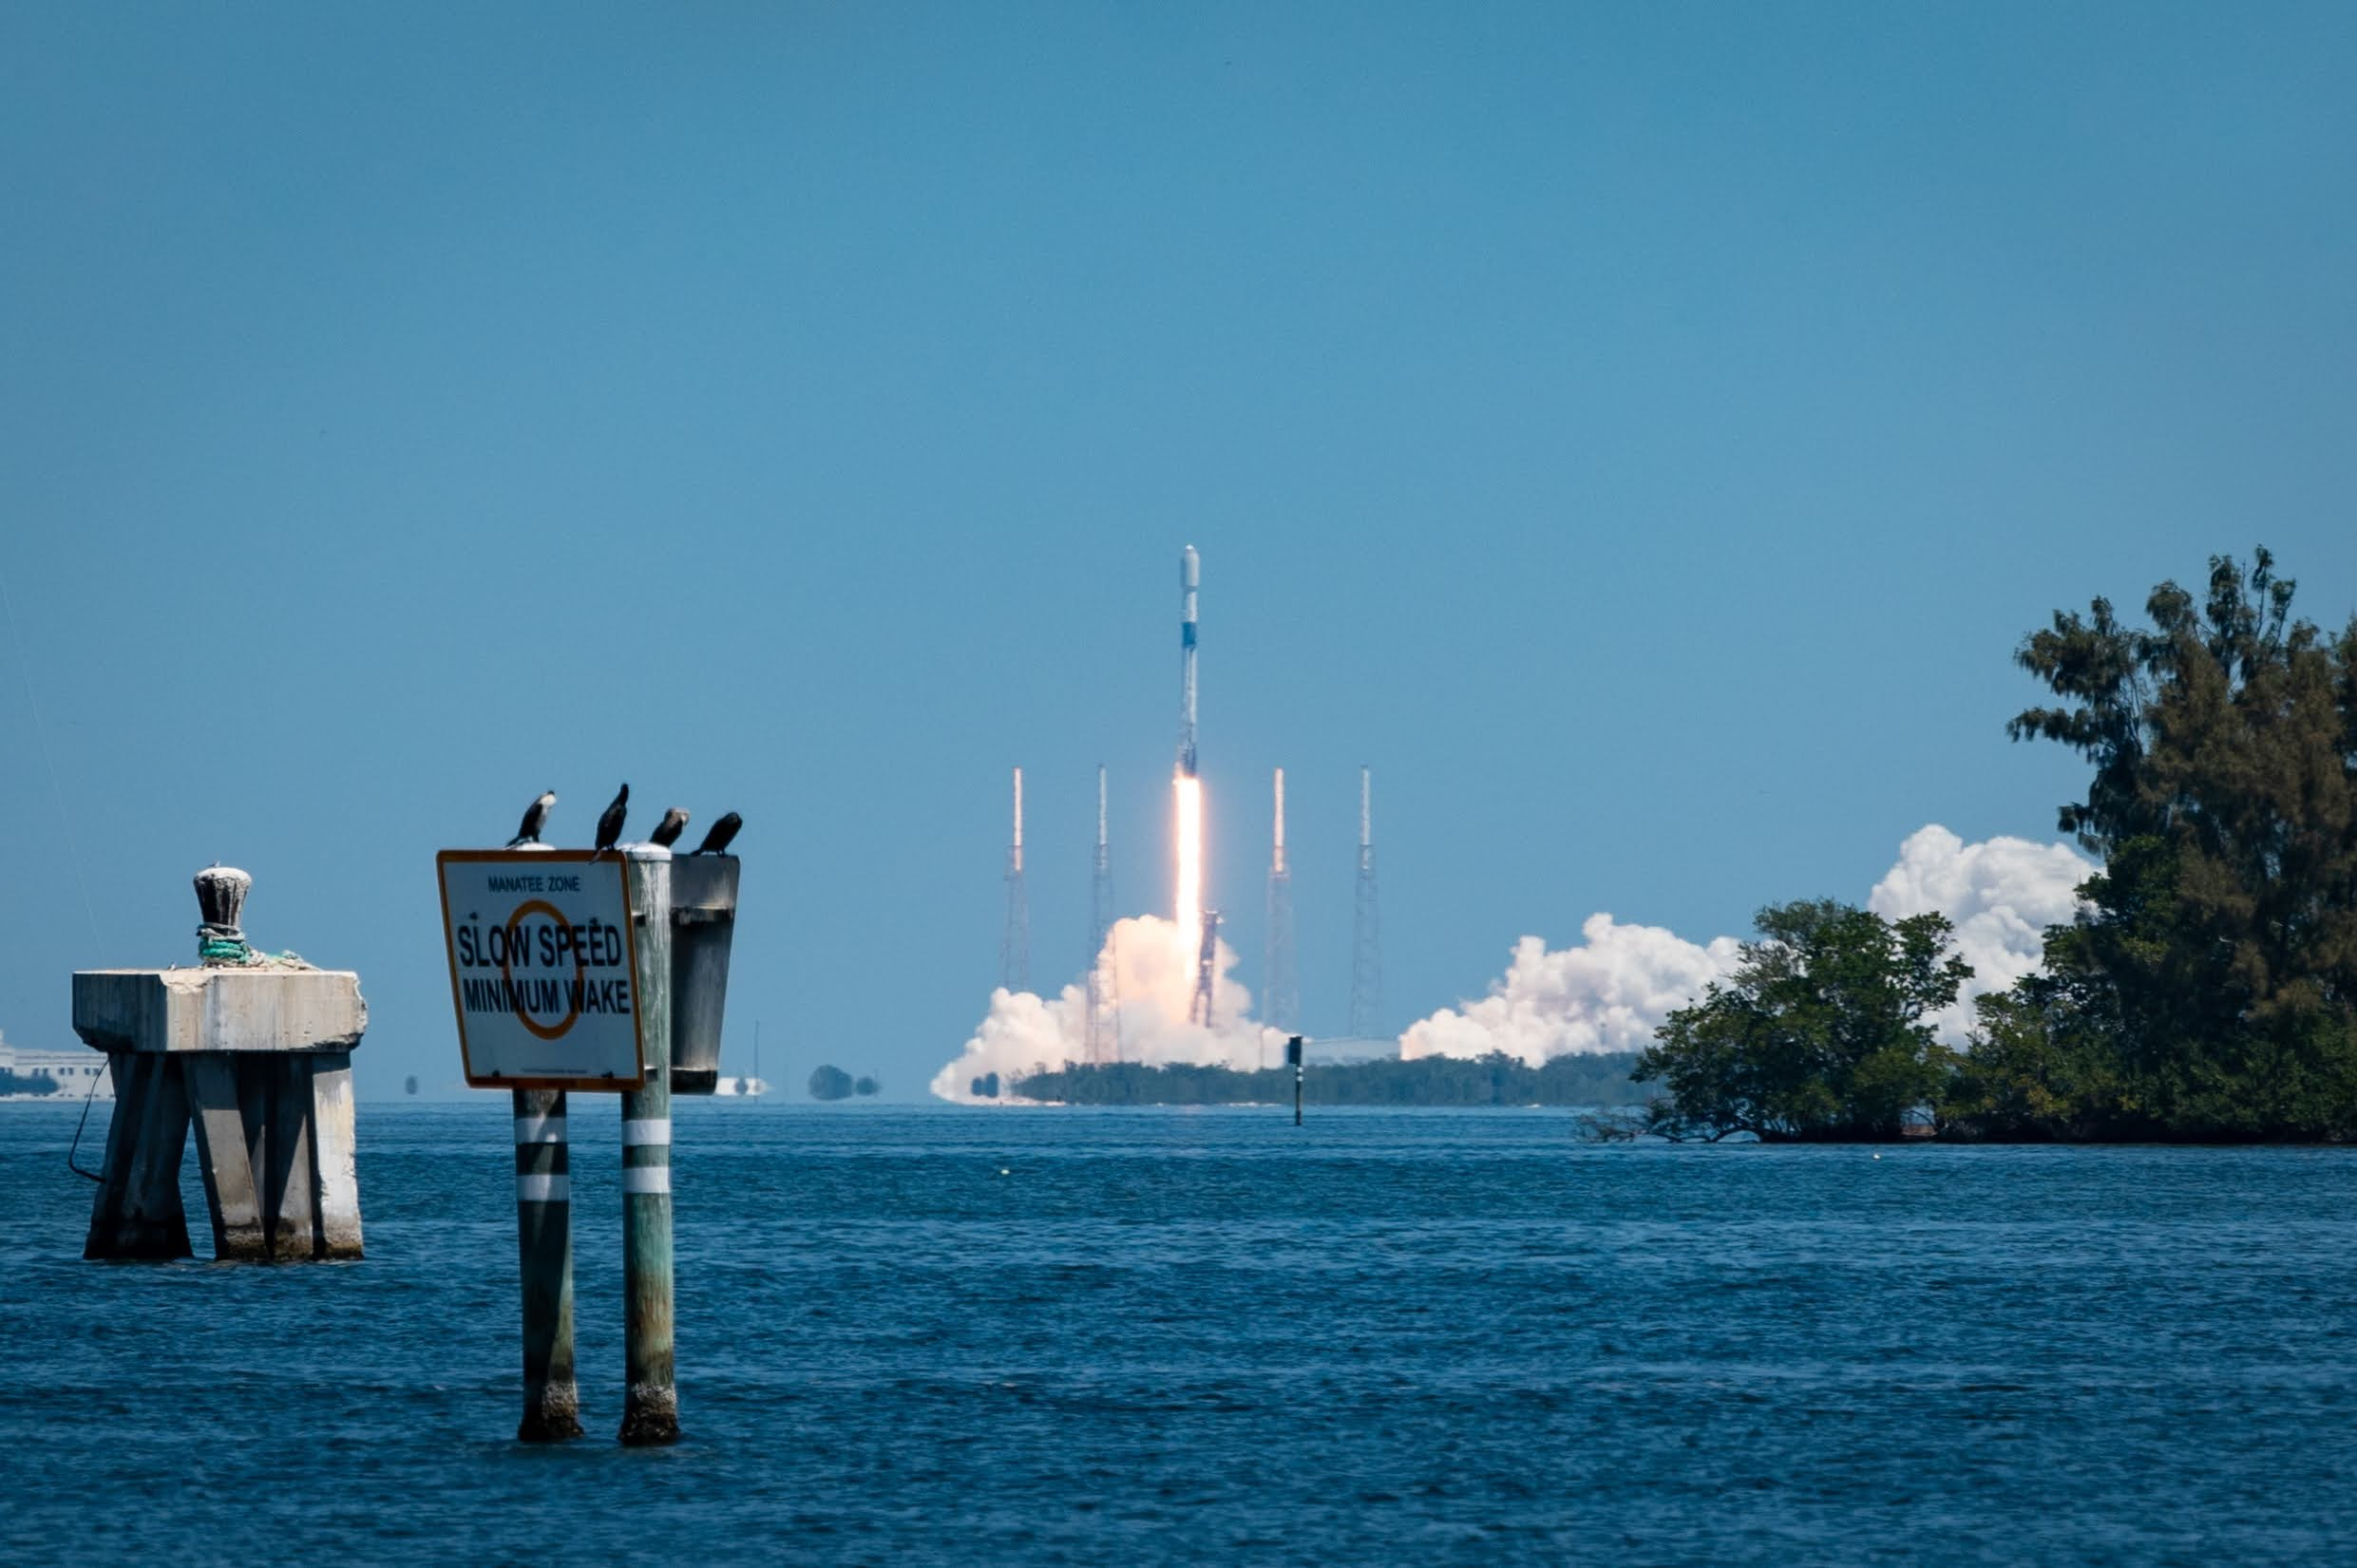 View of SpaceX Falcon 9 Starlink V1.0-L23 launch from SLC-40 pad at the Cape Canaveral Space Force Station in Florida on April 7, 2021 as seen from across the Banana River.